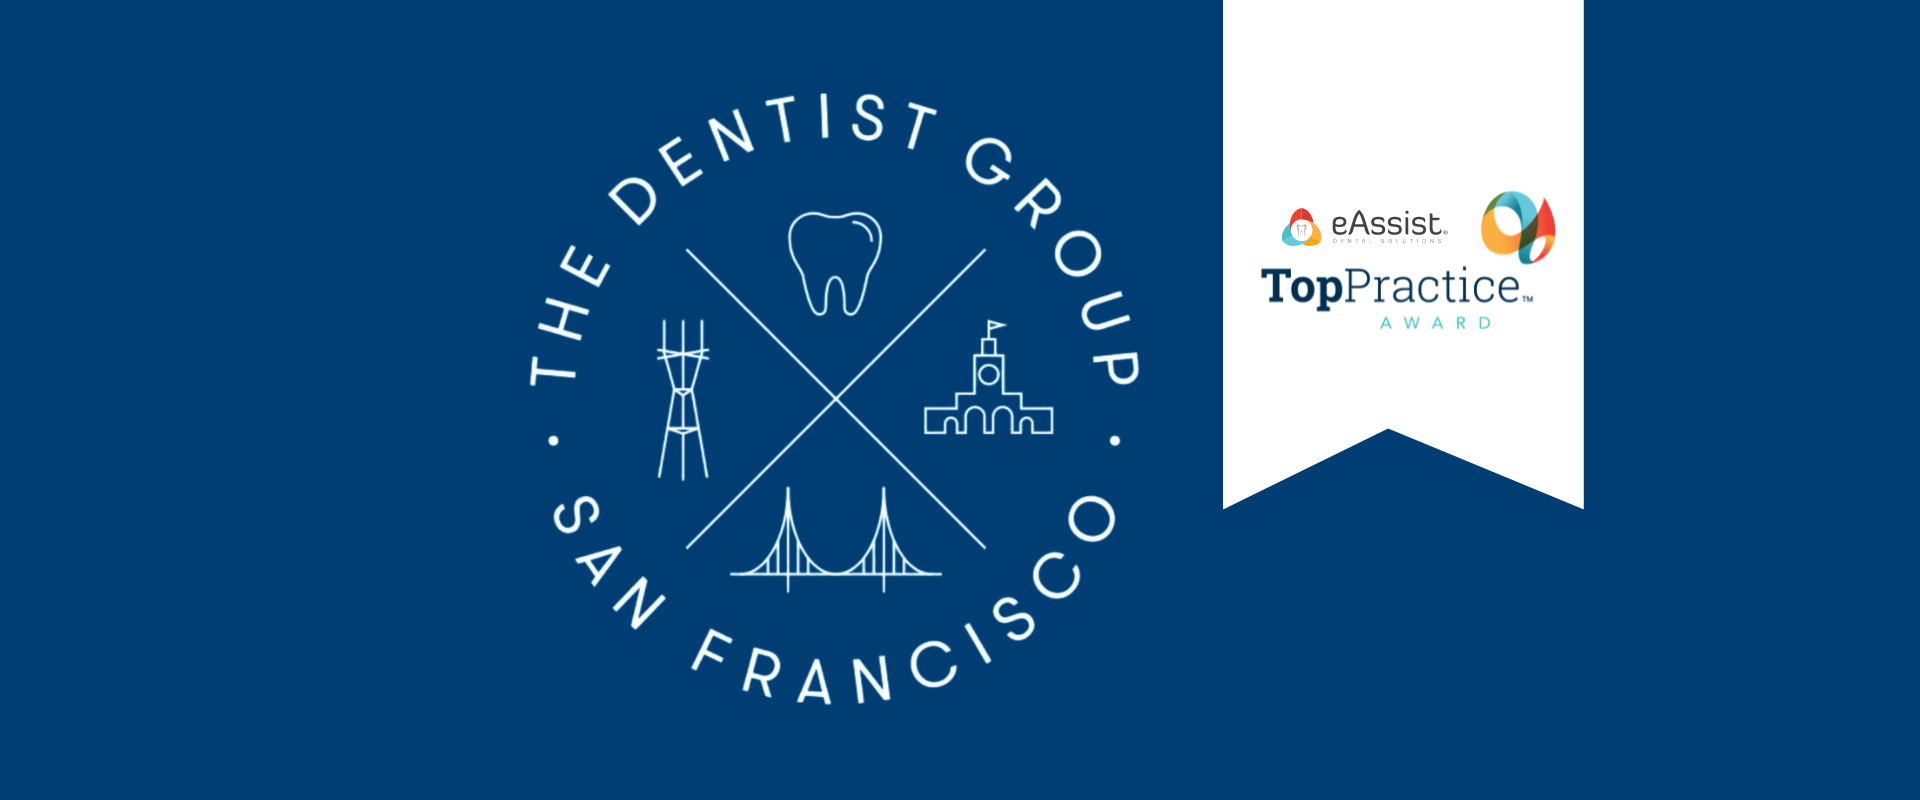 The Dentist Group Wins eAssist Top Practice Award